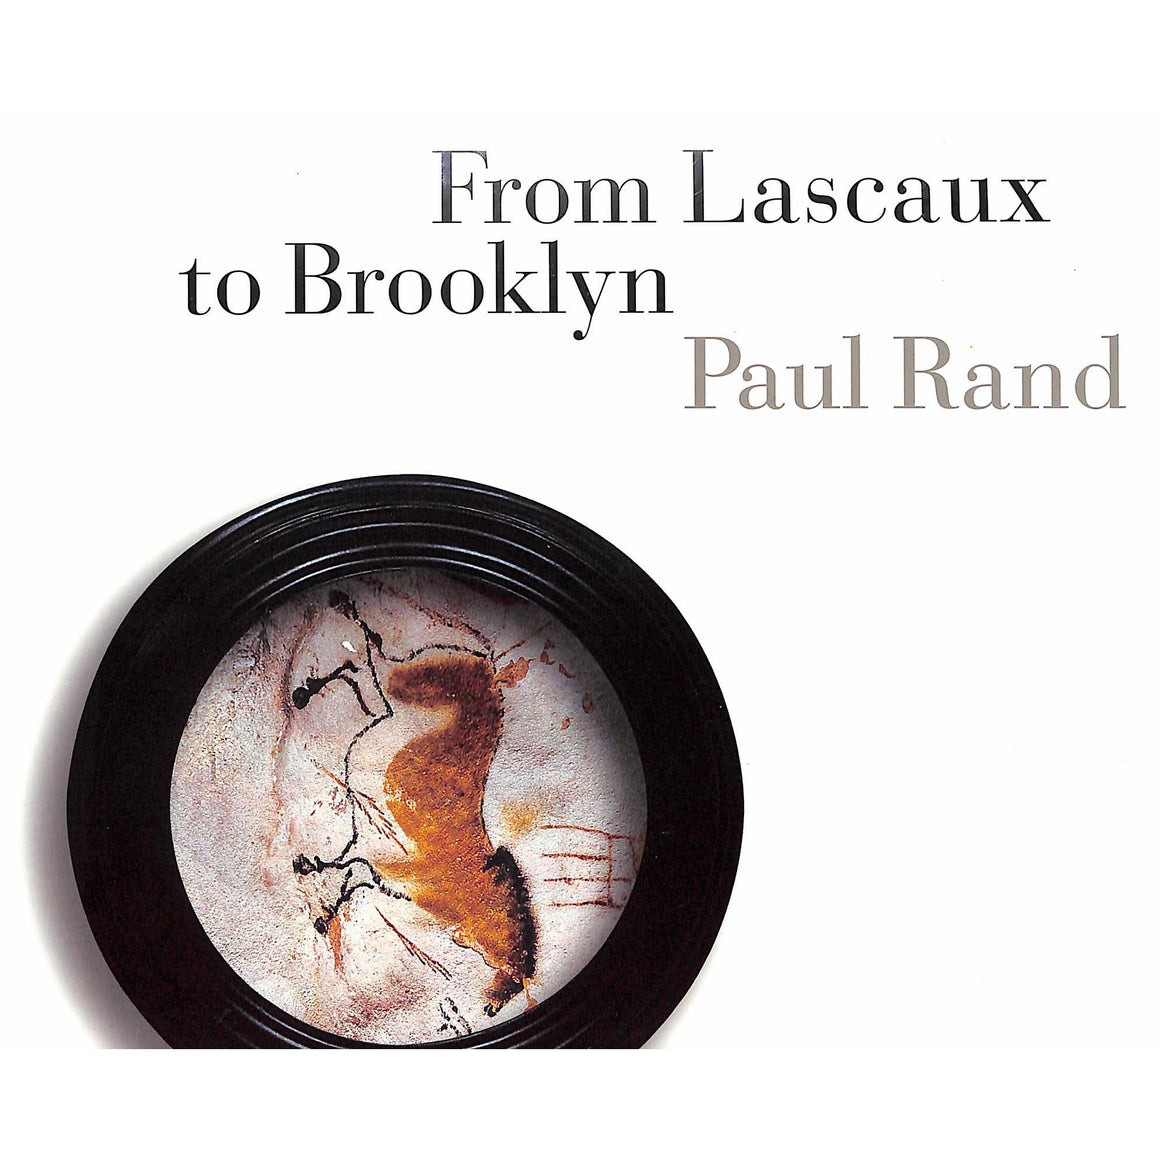 From Lascaux to Brooklyn